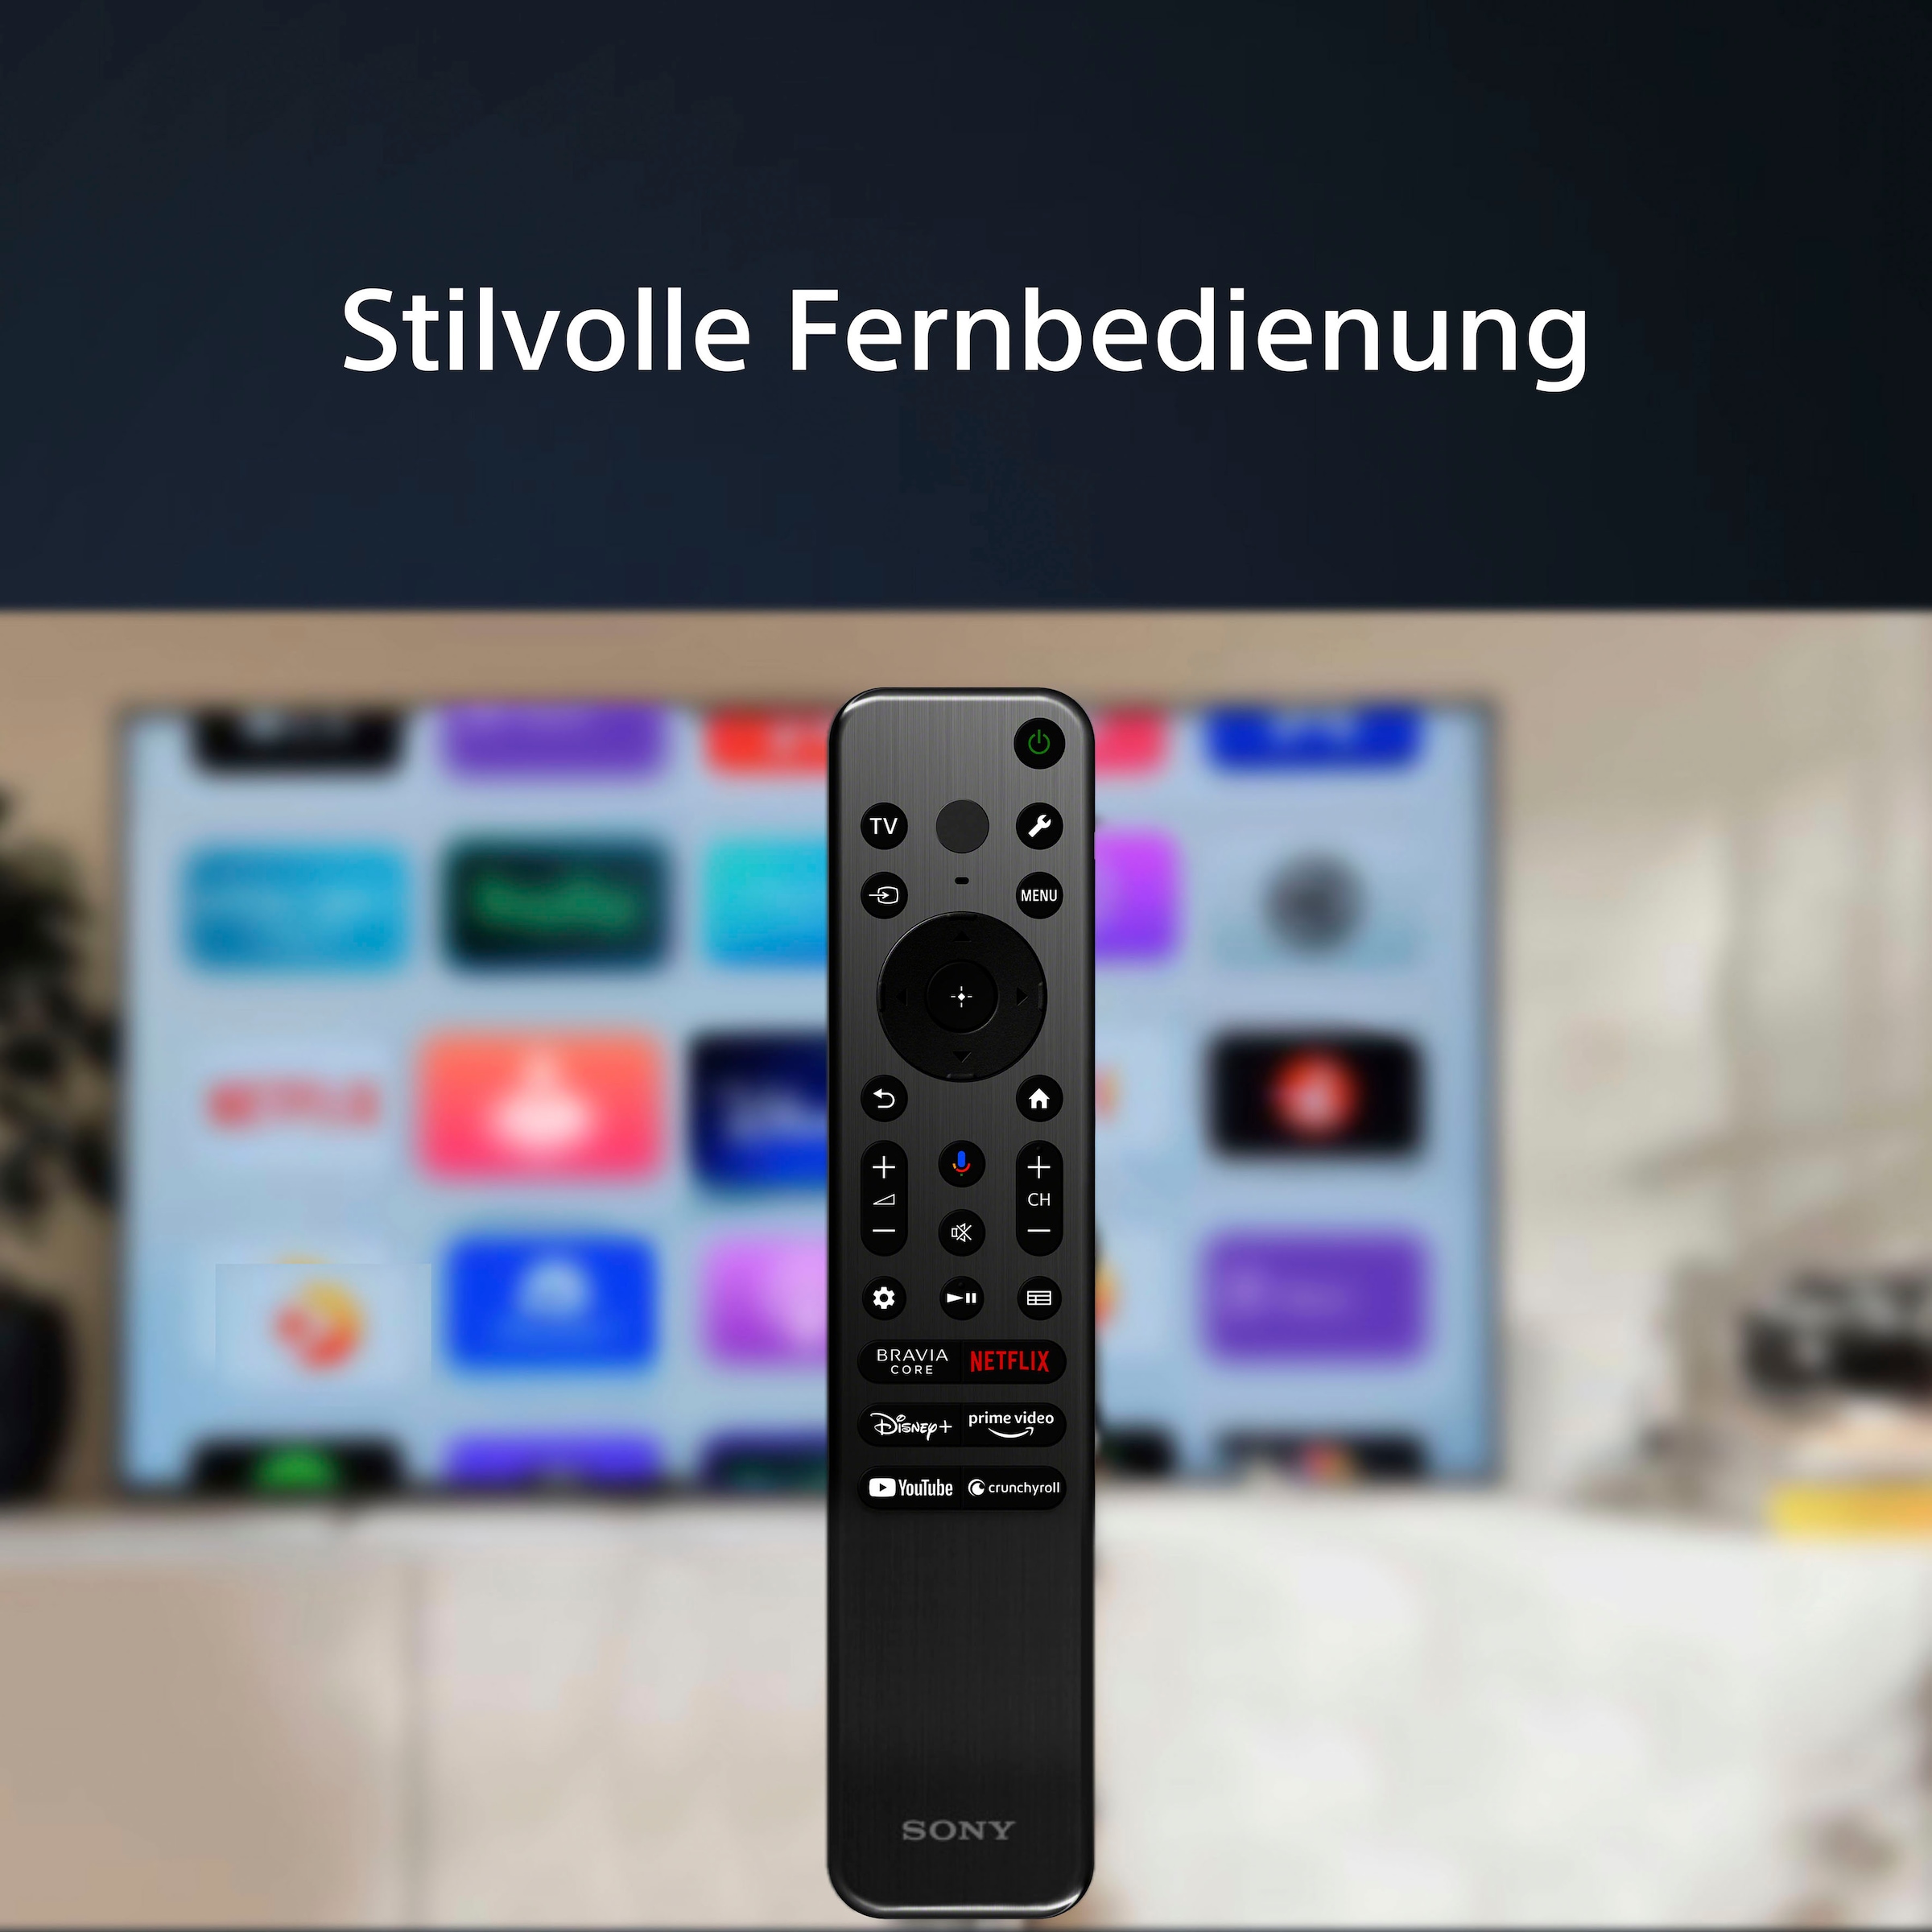 Sony OLED-Fernseher, 210 cm/83 Zoll, 4K Ultra HD, Google TV-Smart-TV-Android TV, Smart-TV, TRILUMINOS PRO, BRAVIA CORE, mit exklusiven PS5-Features